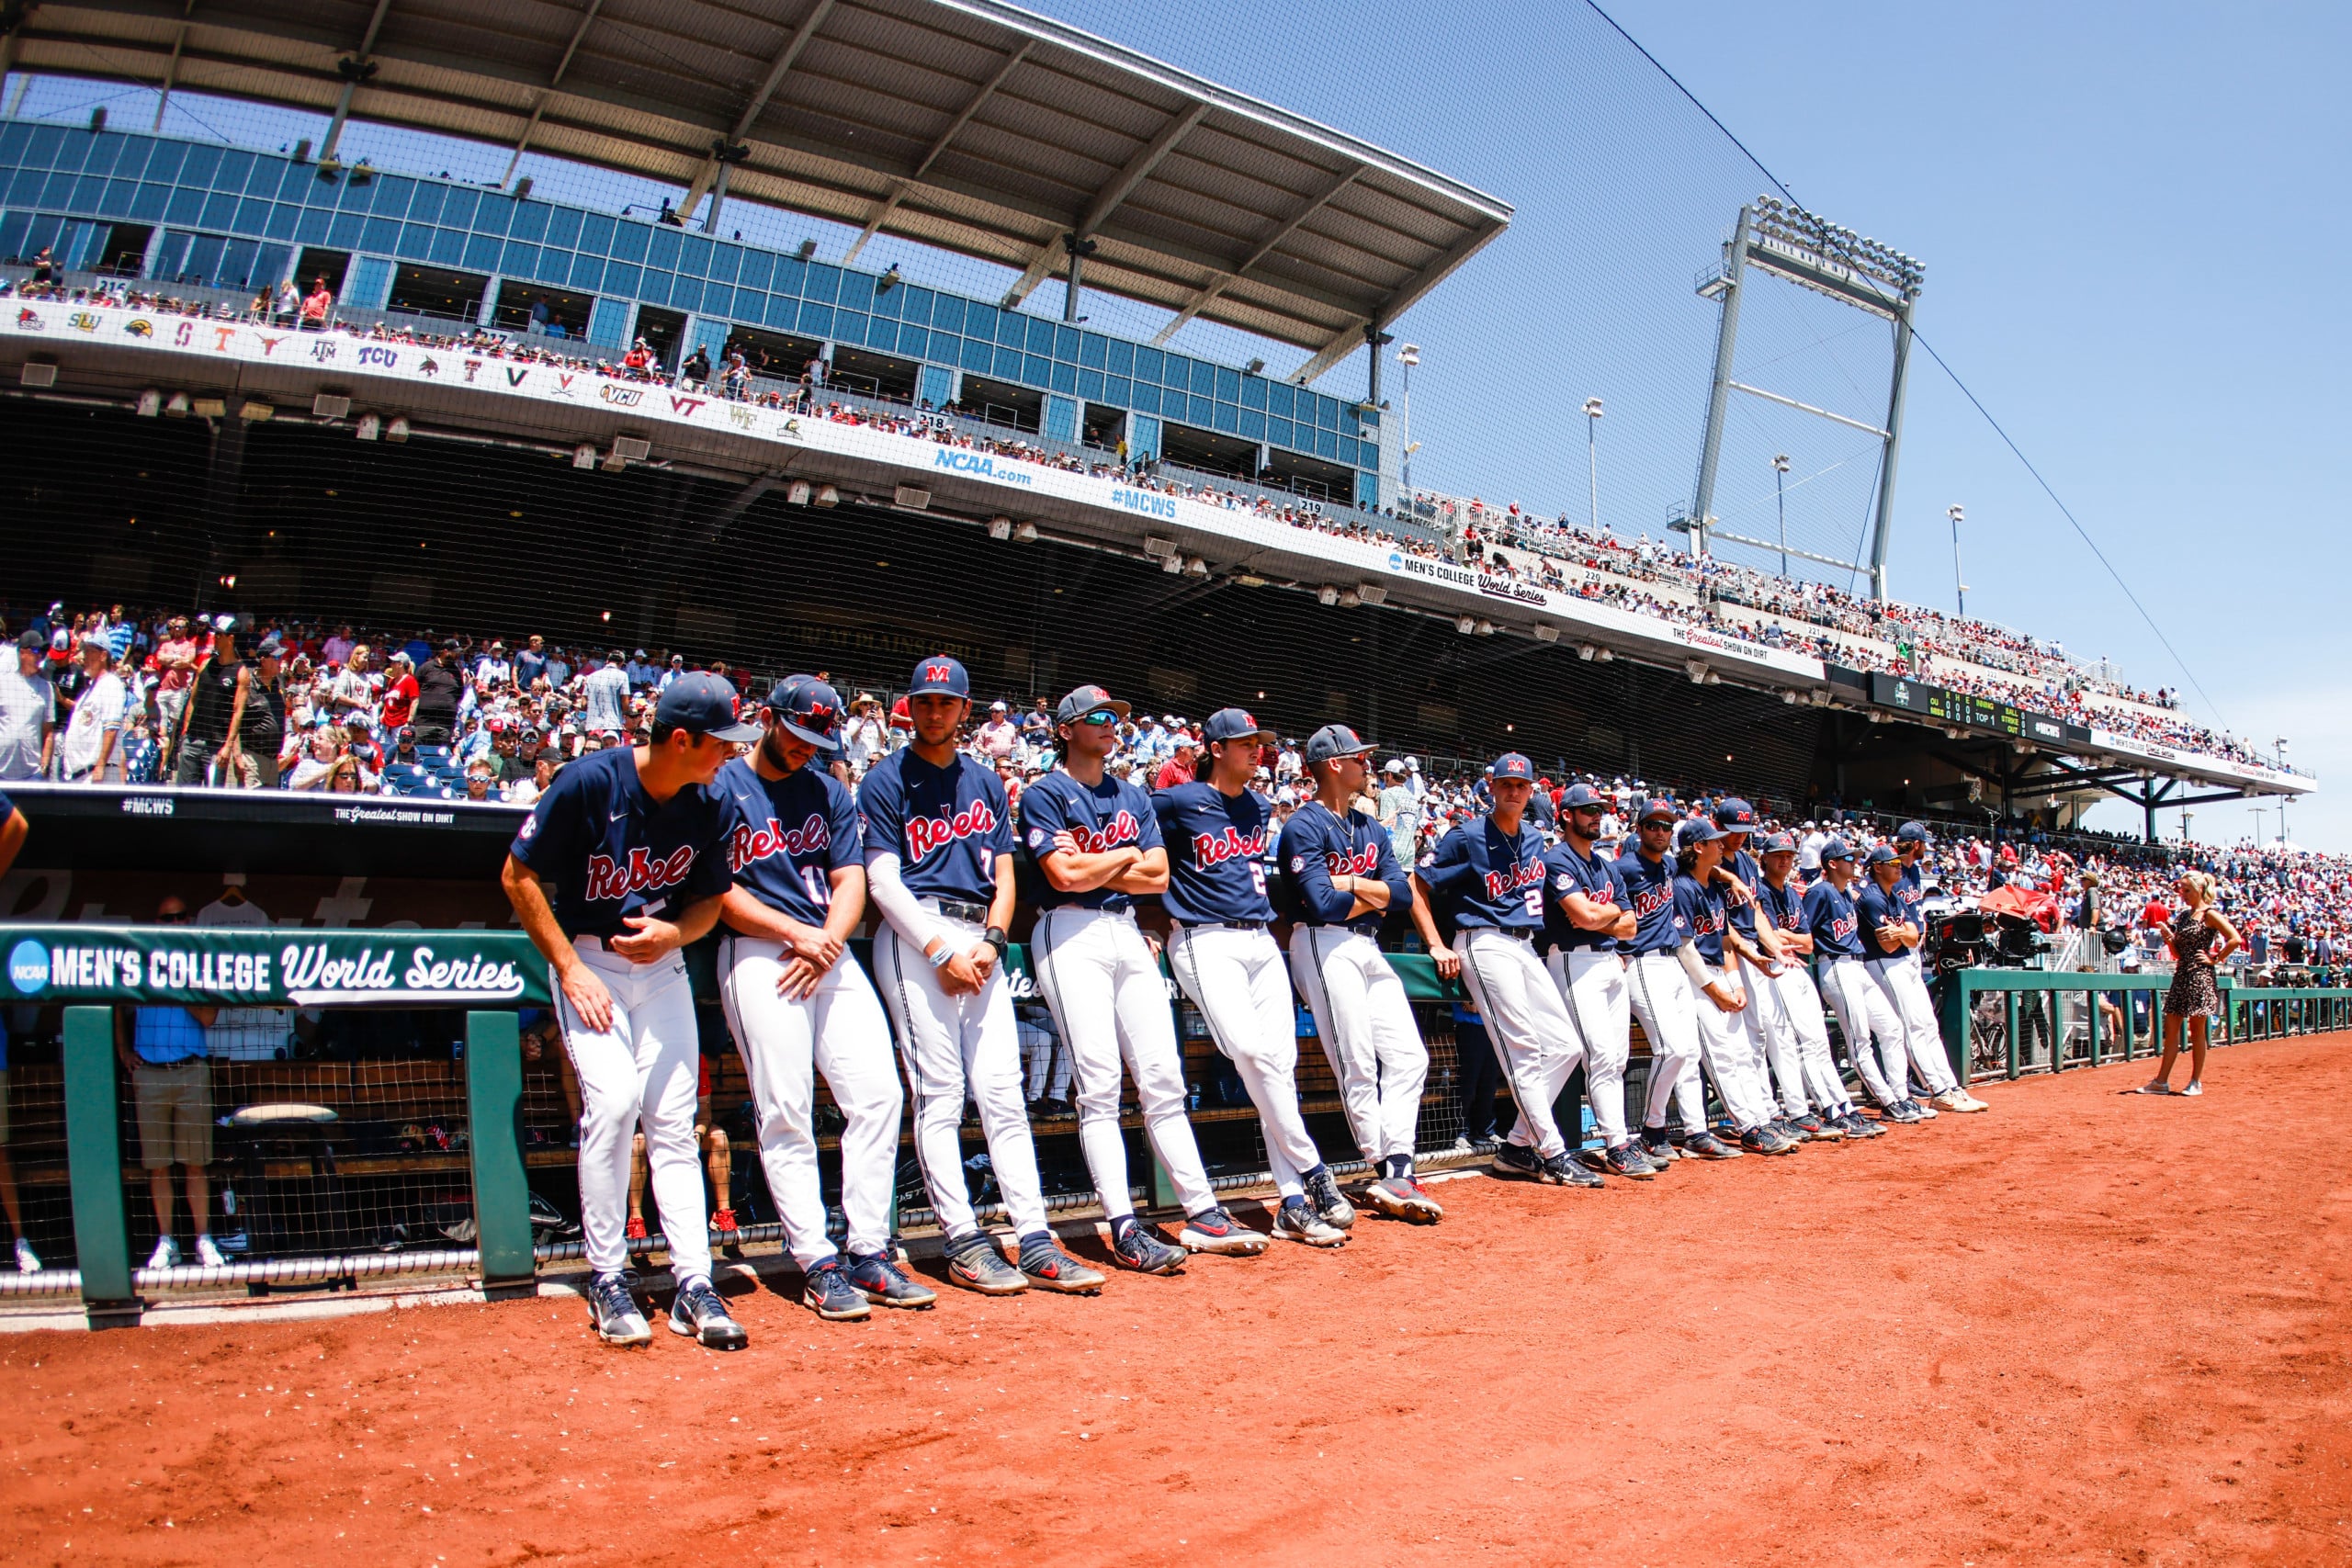 Ole Miss baseball players lean against dug-out during baseball College World Series in Omaha